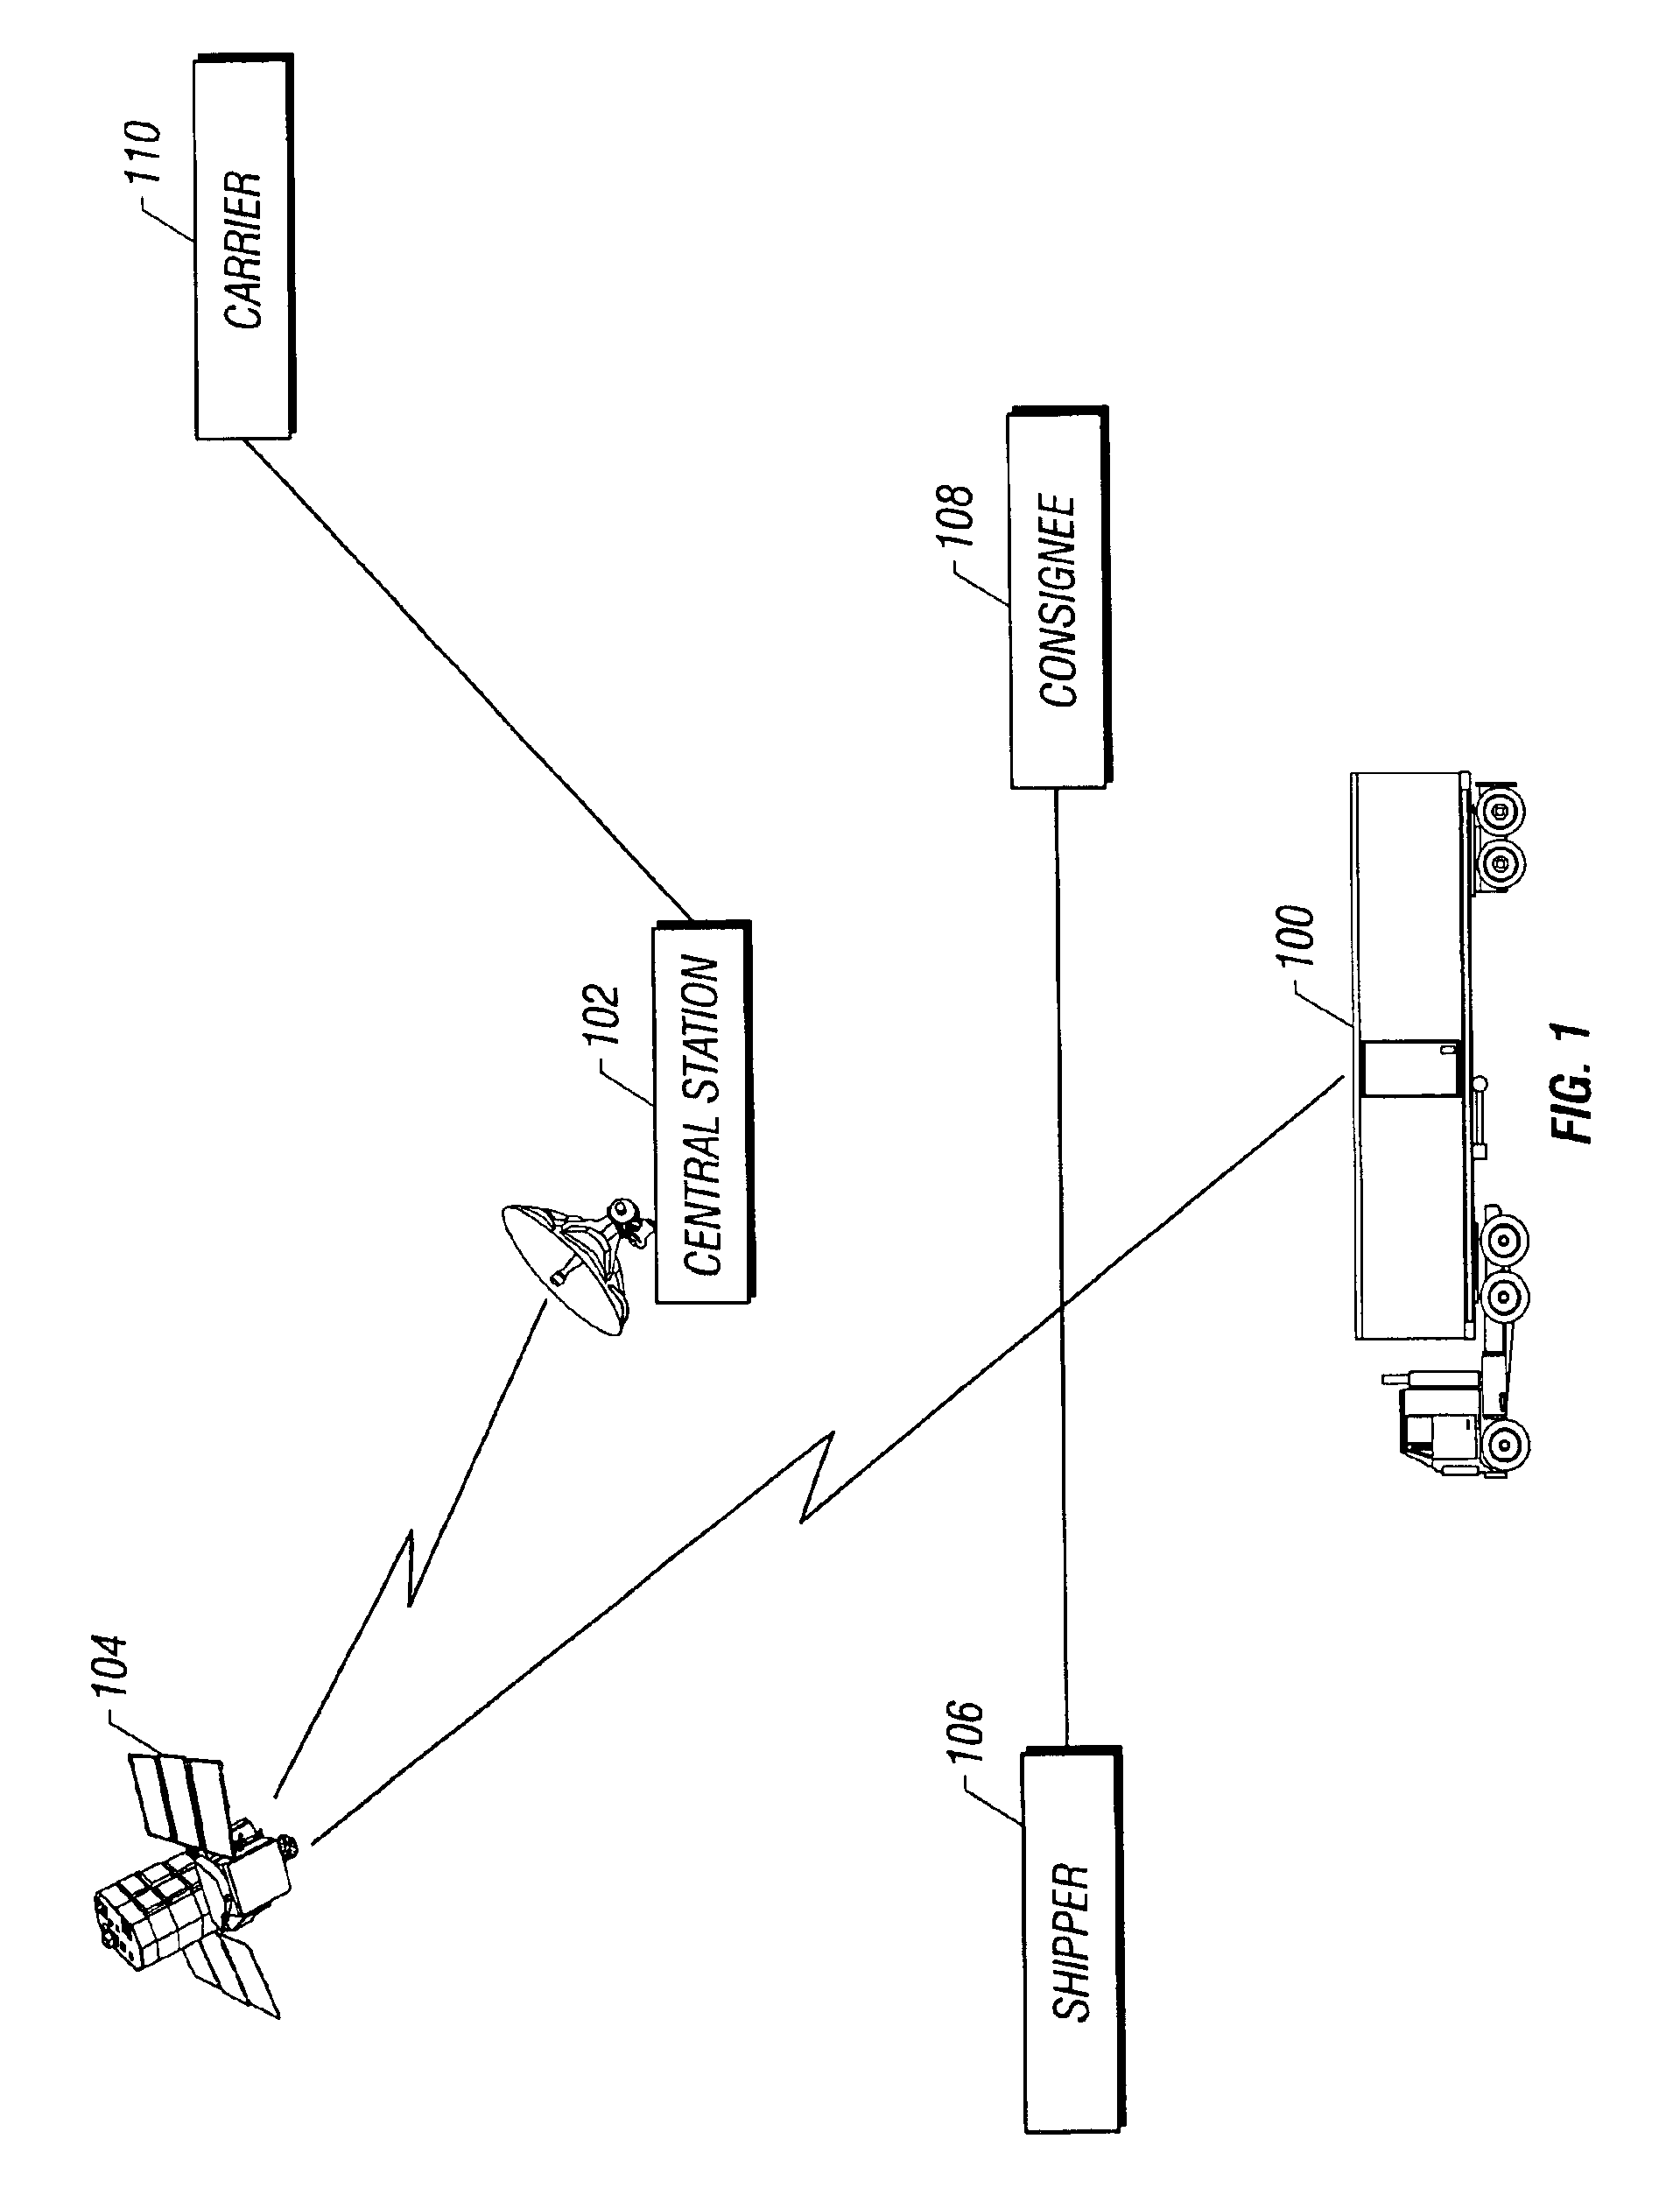 Method and apparatus for providing a proof of delivery verification for freight transportation systems